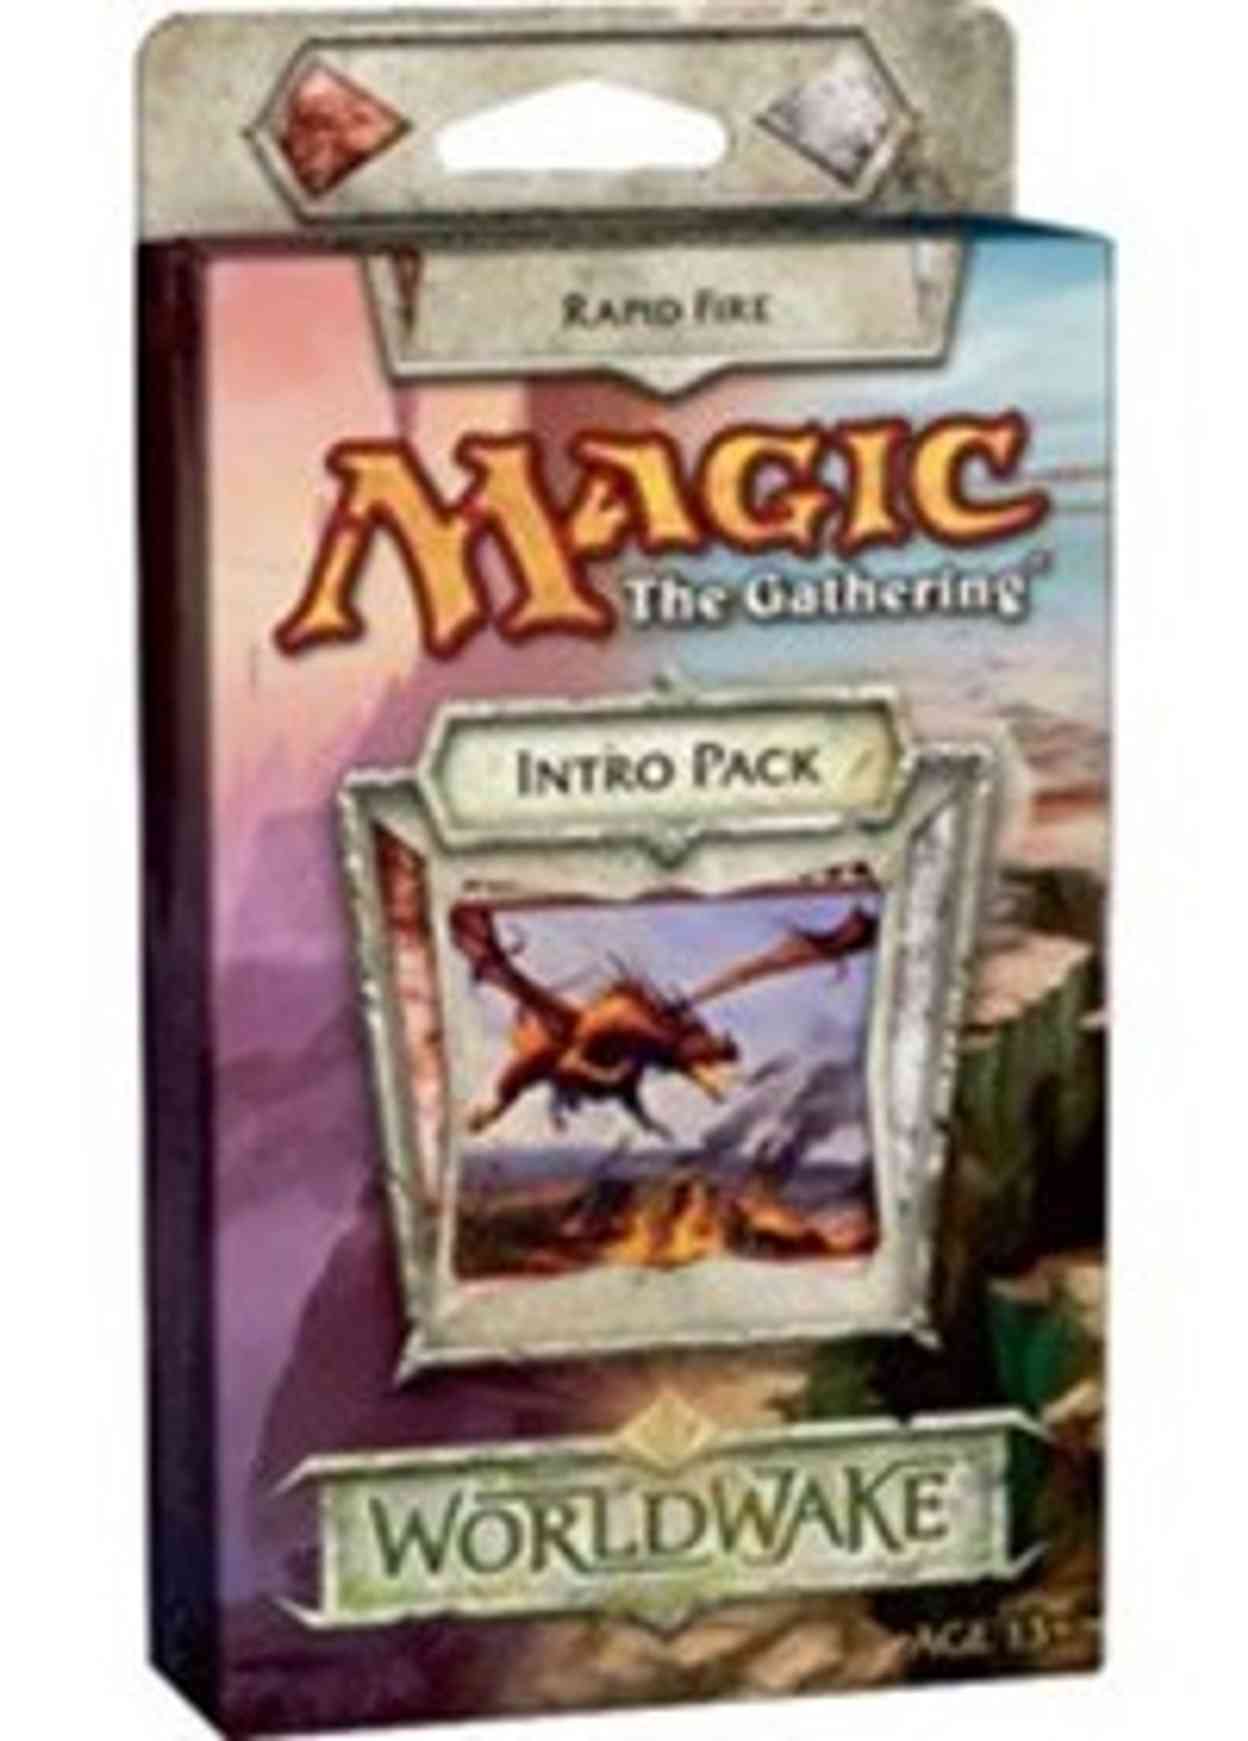 Worldwake Intro Pack - Rapid Fire magic card front